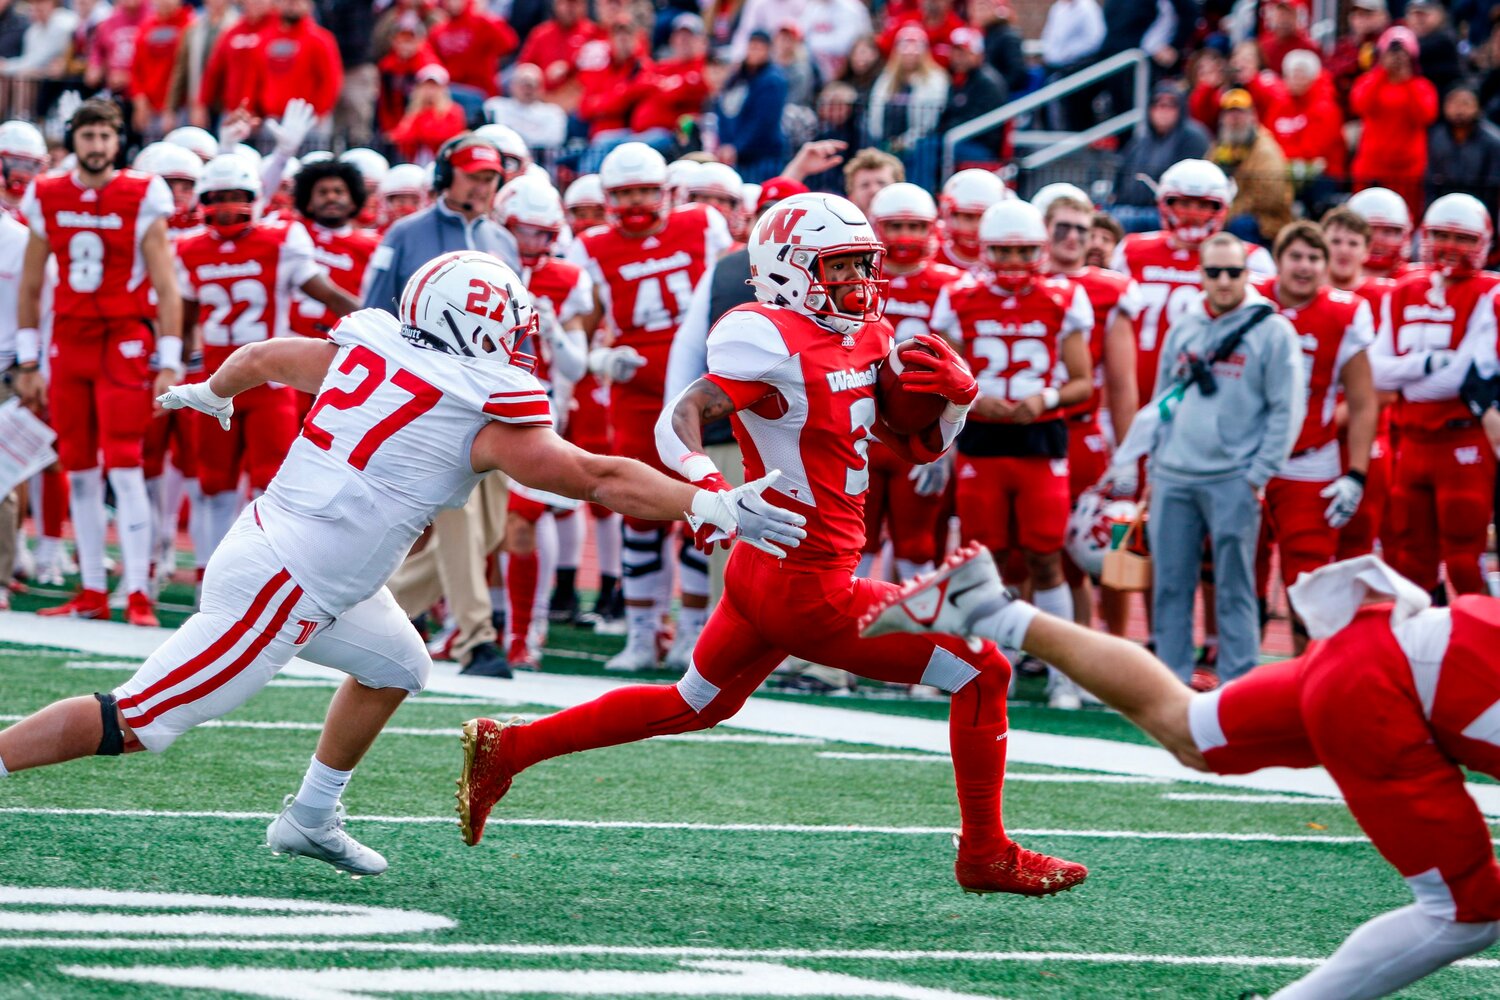 Wabash's Derek Allen Jr. had three touchdown grabs in the Little Giants dominating 52-20 win over Wittenberg on Saturday. The win gives Wabash sole possession of 2nd place in the NCAC.